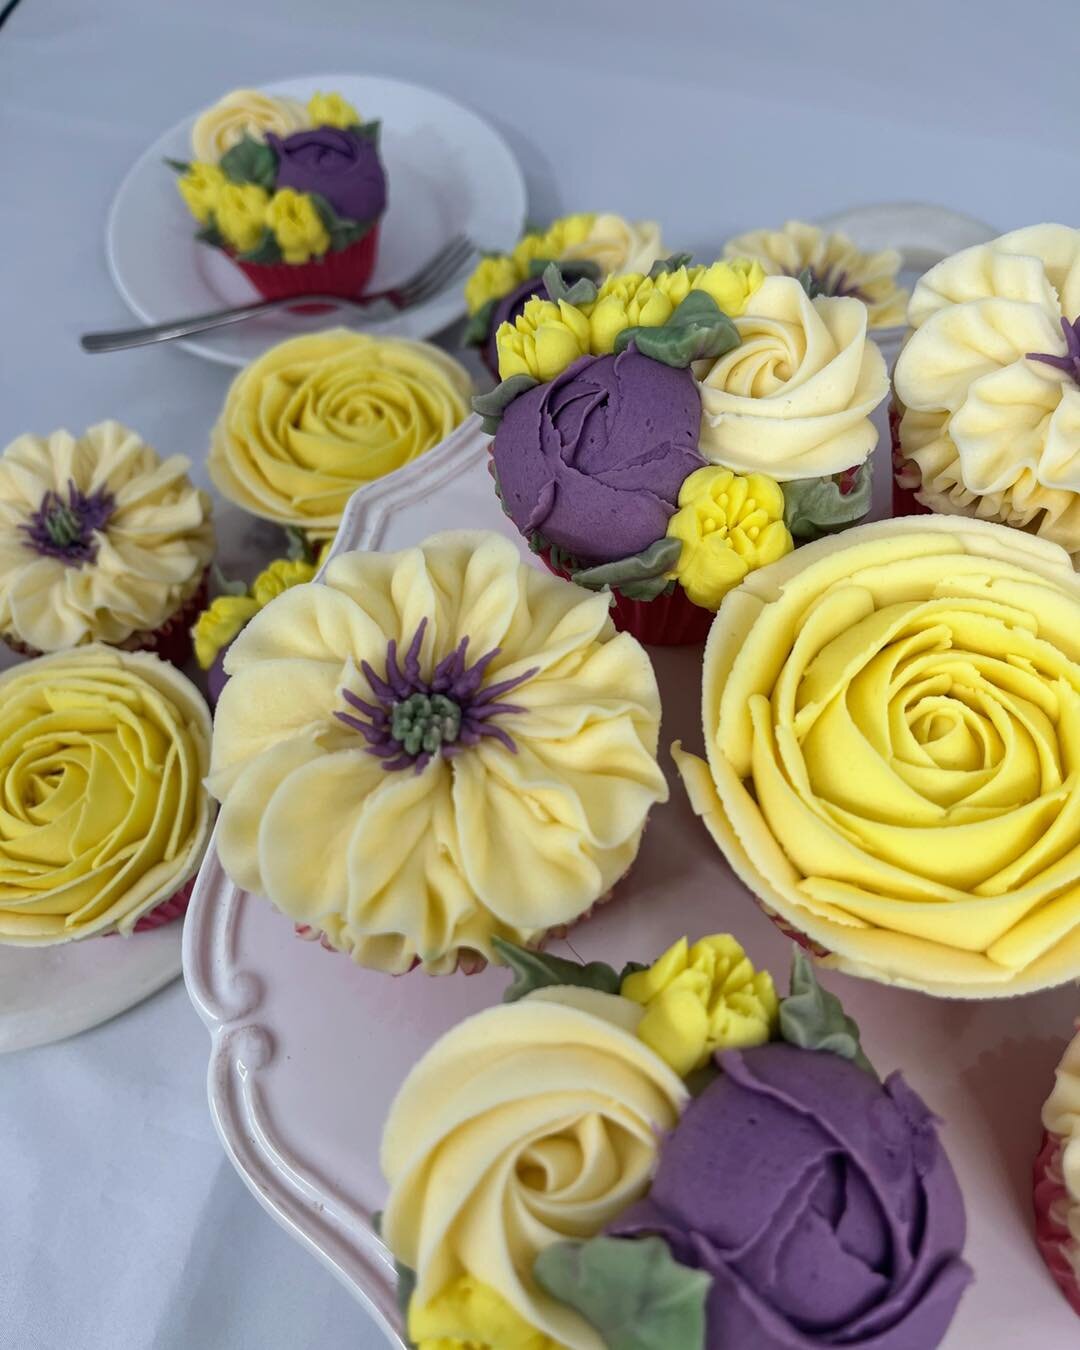 Saying &ldquo;I love you&rdquo; made easy with these tasty flowers. 
Now taking orders https://www.tarasbakedbouquets.ie/small-cupcake-bouquet #cupcakes #cupcakeflowerbouquets #cupcakeflowerbouquet #floralcupcakebouquet #floralcupcake #cupcakeflower 